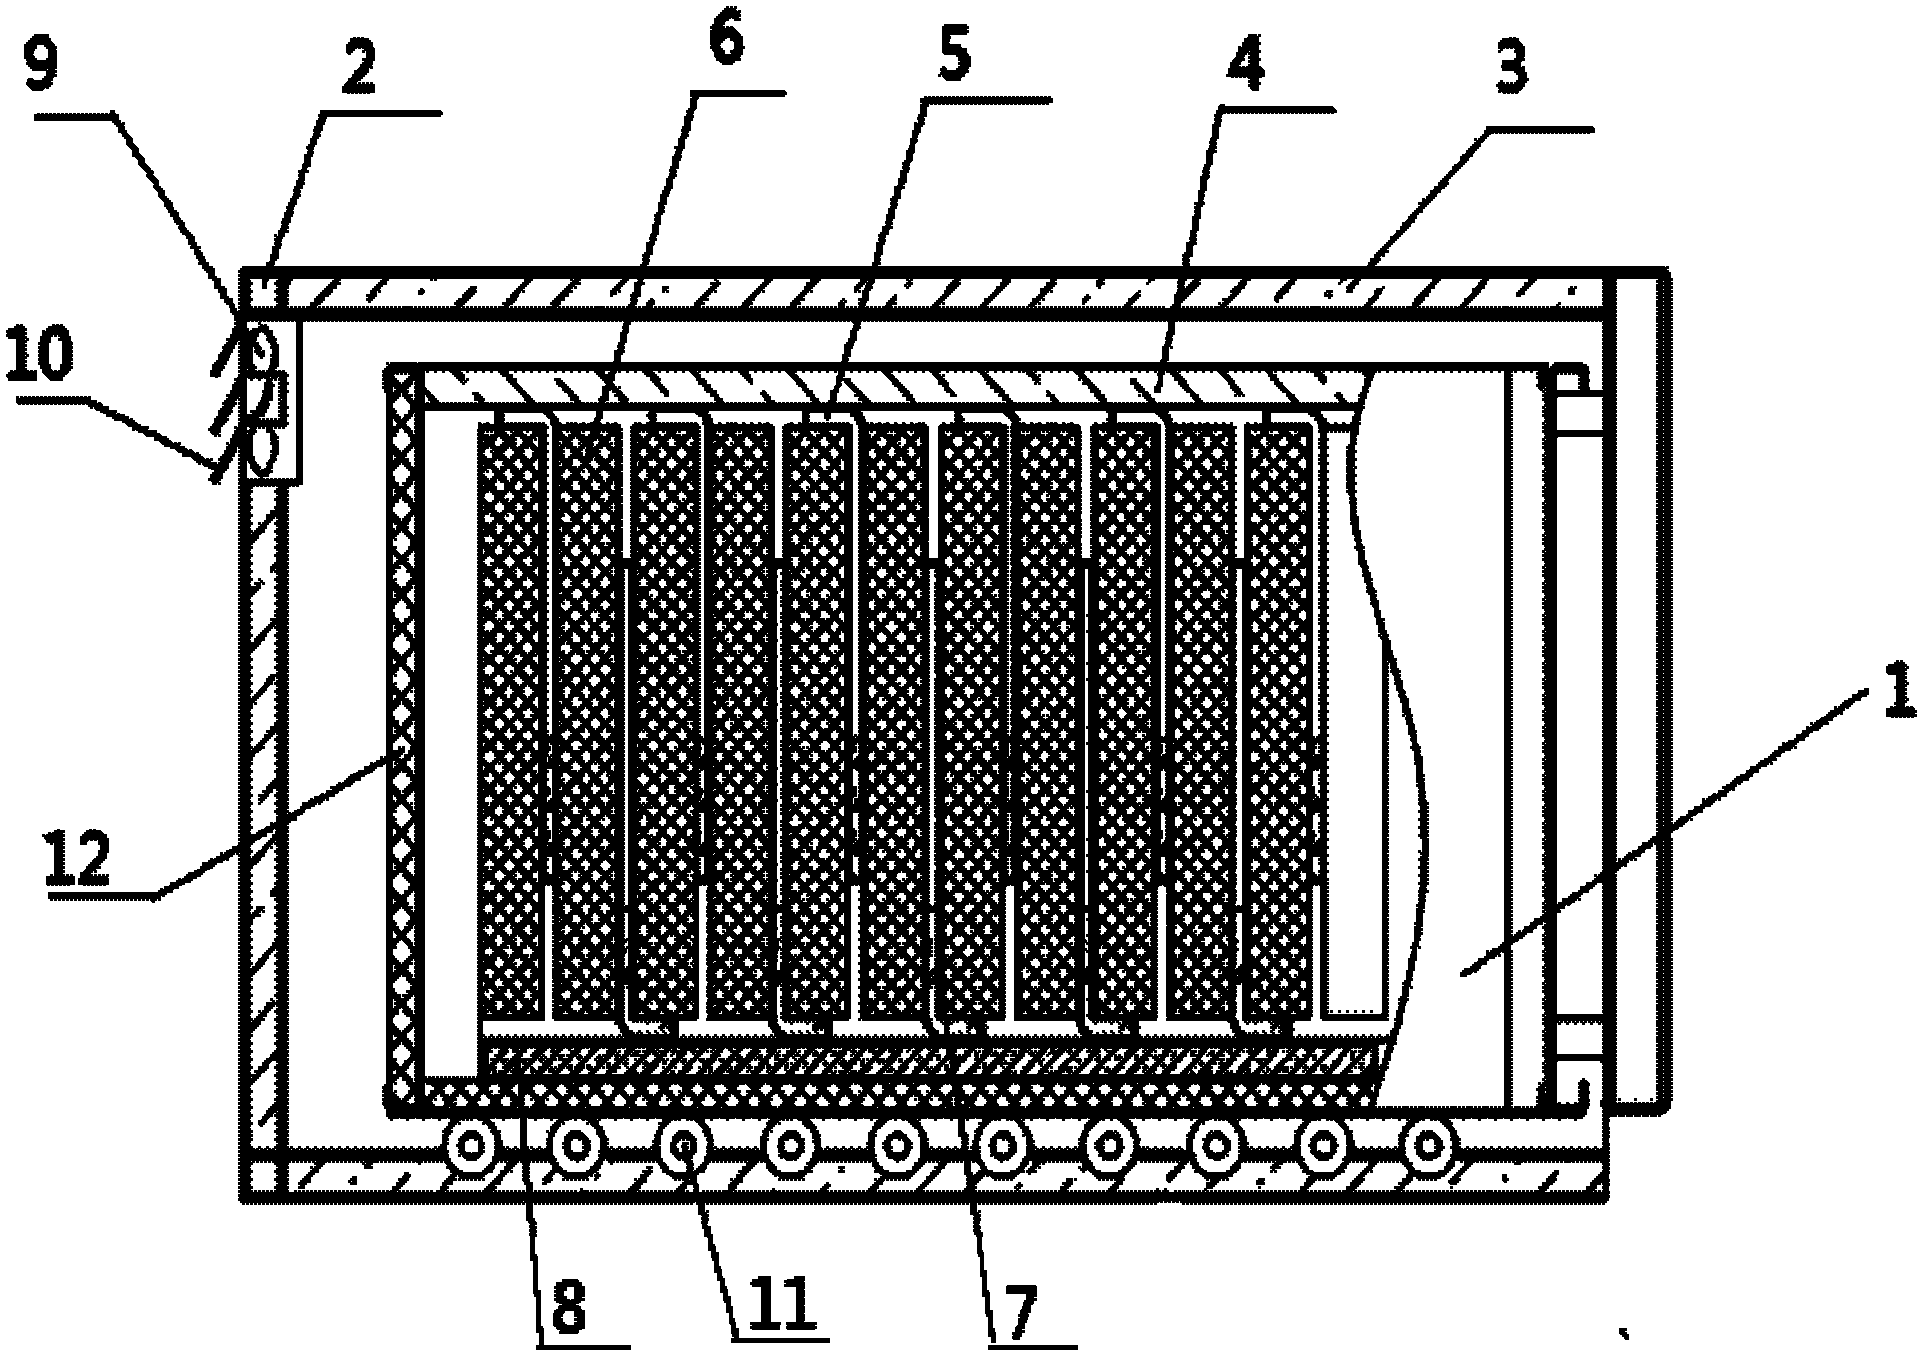 A heat pipe temperature control system for a vehicle power battery box